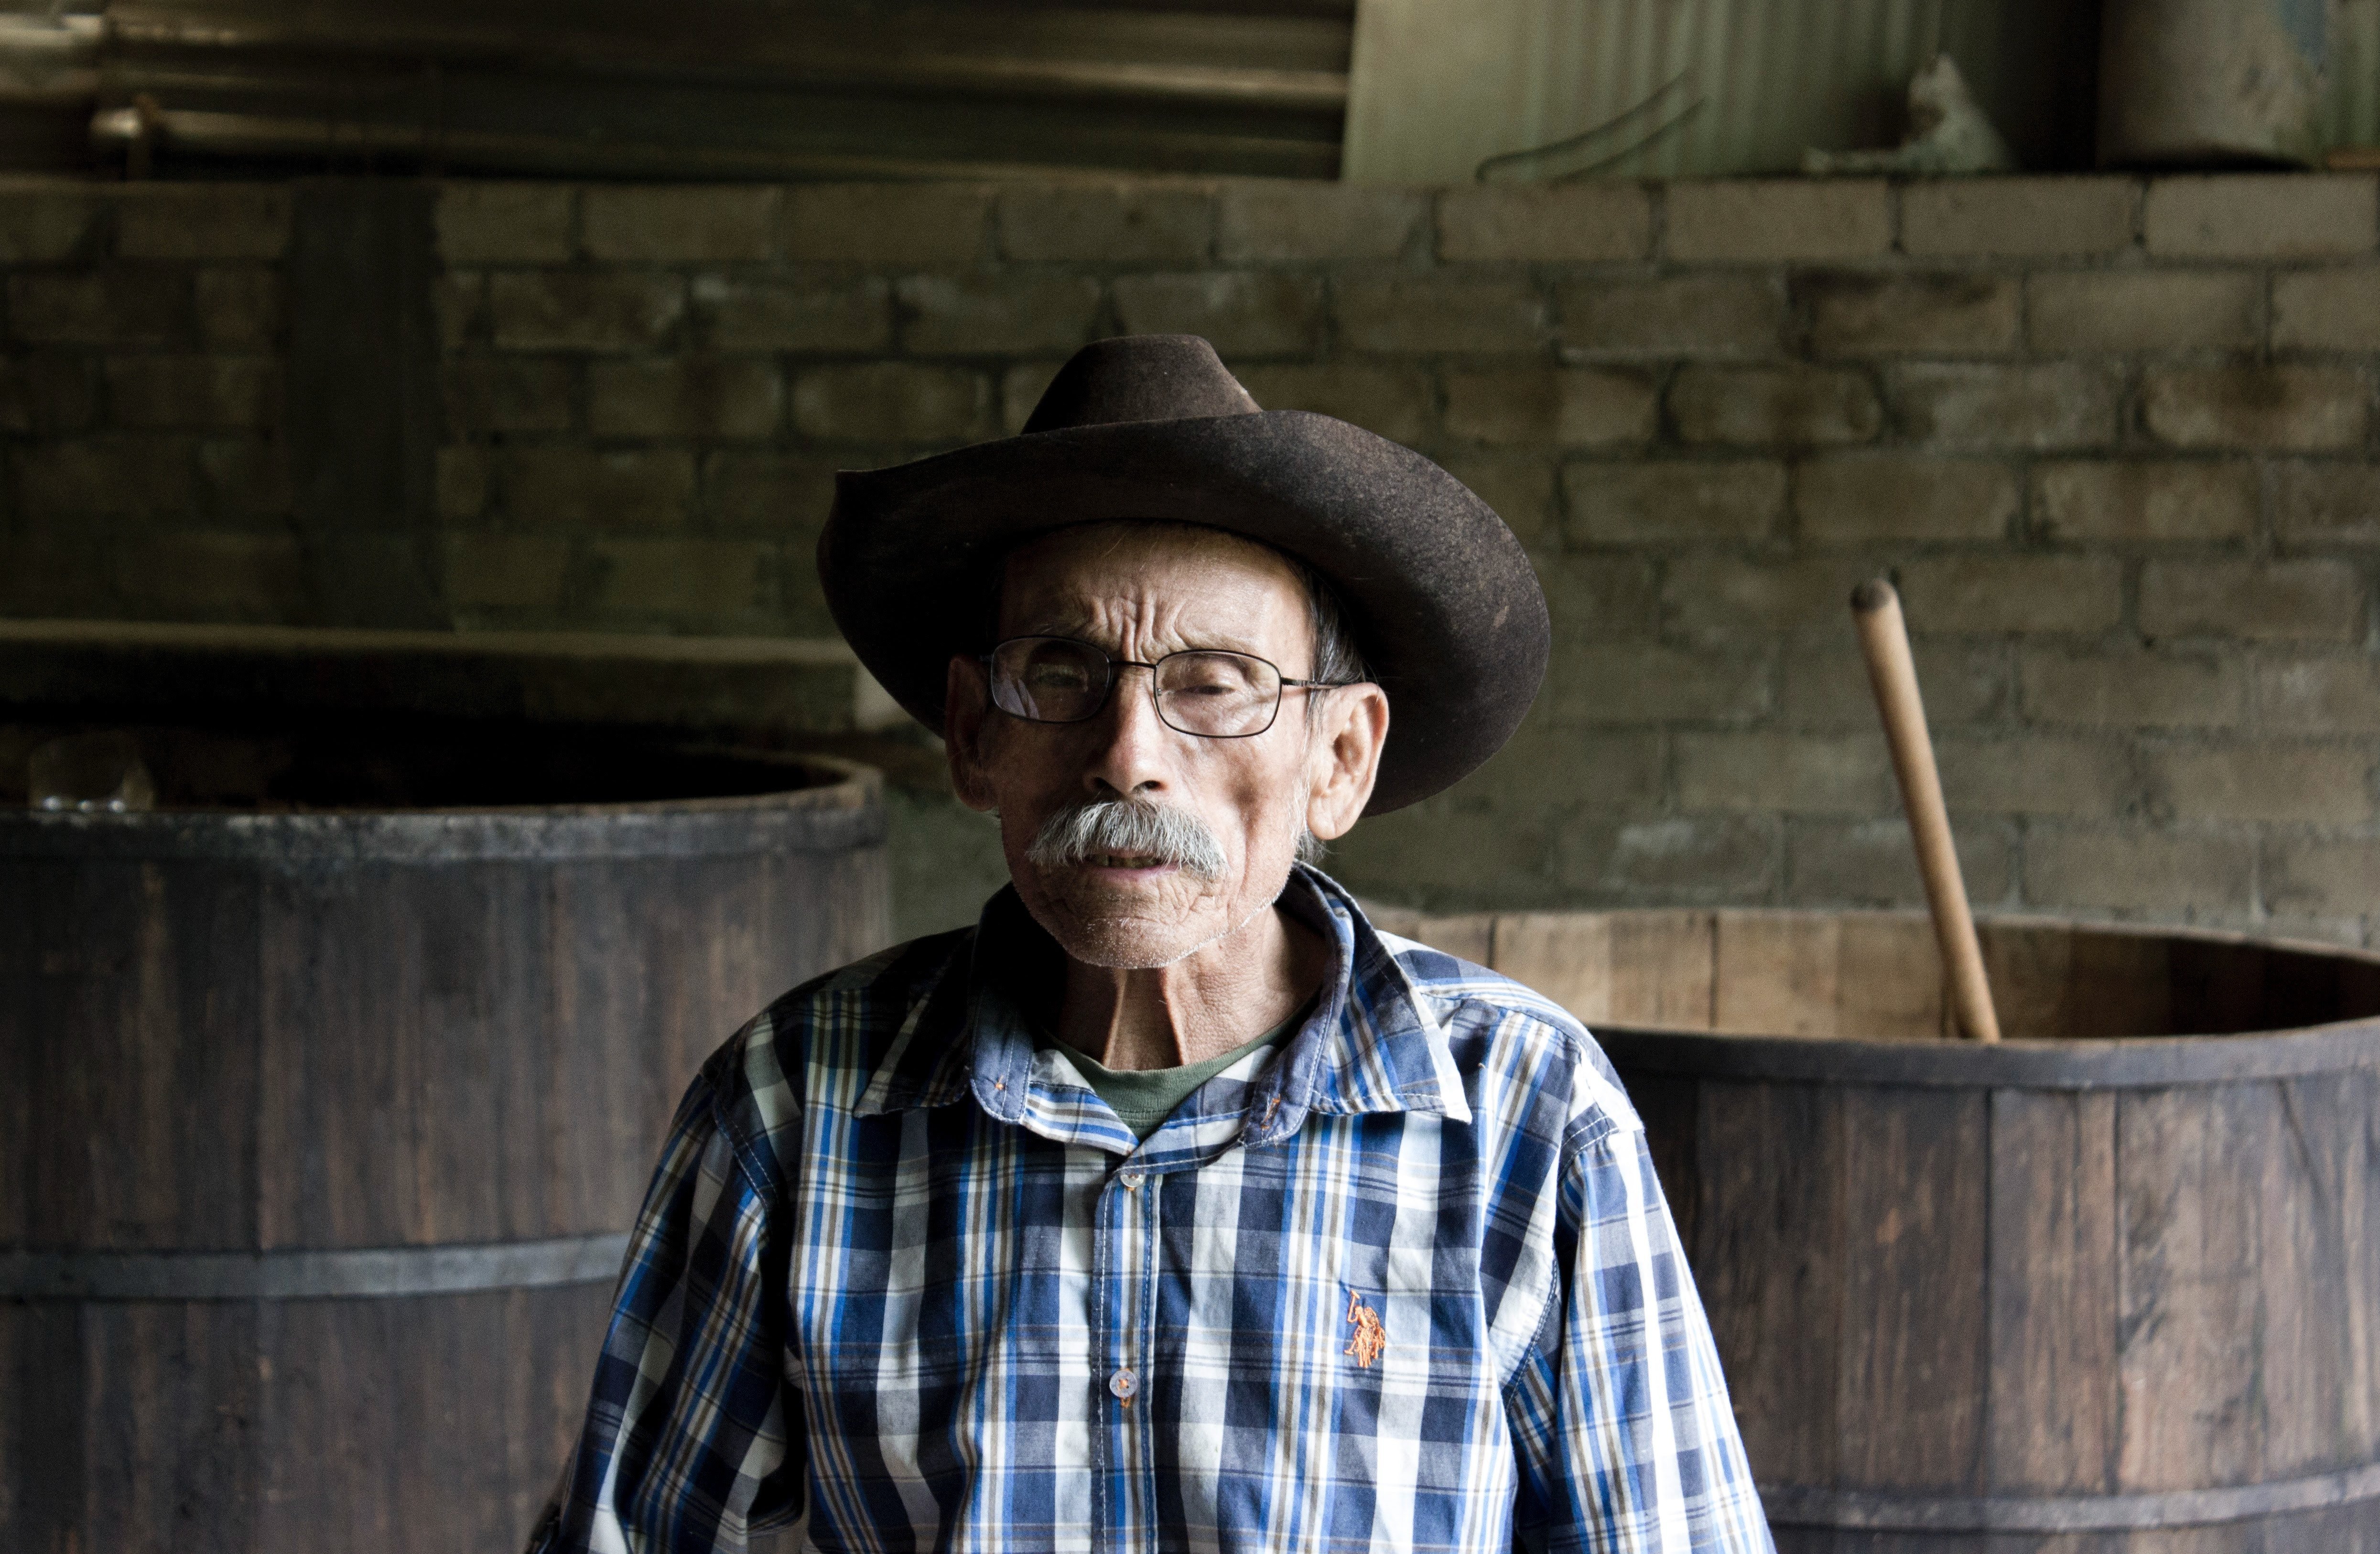 An old man with cowboy hat on. | Source: Pexels